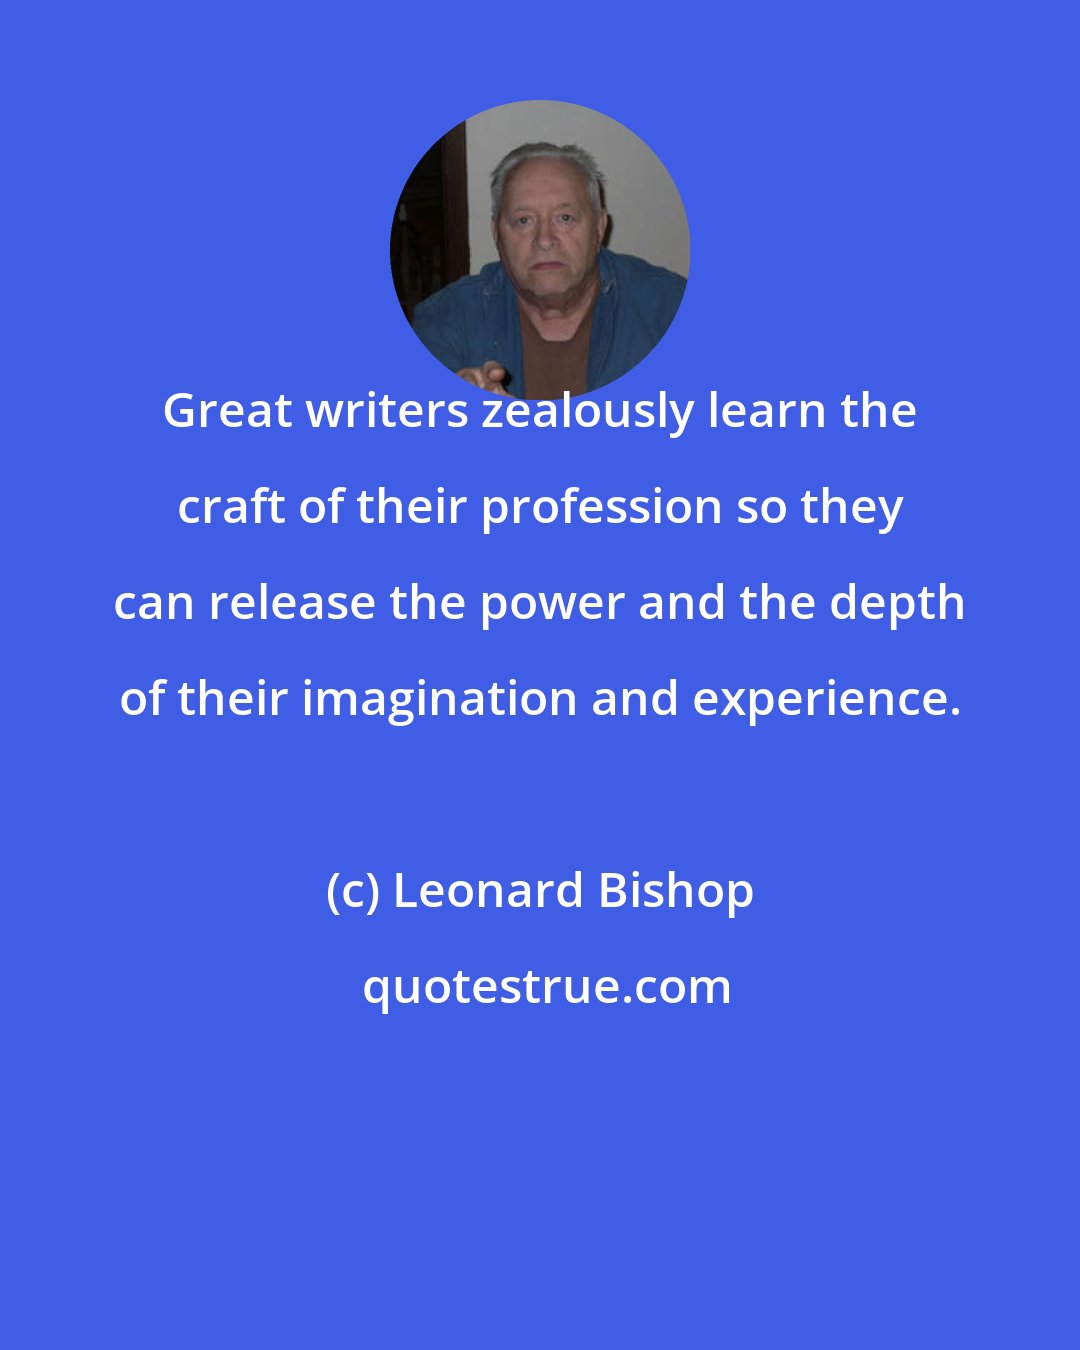 Leonard Bishop: Great writers zealously learn the craft of their profession so they can release the power and the depth of their imagination and experience.